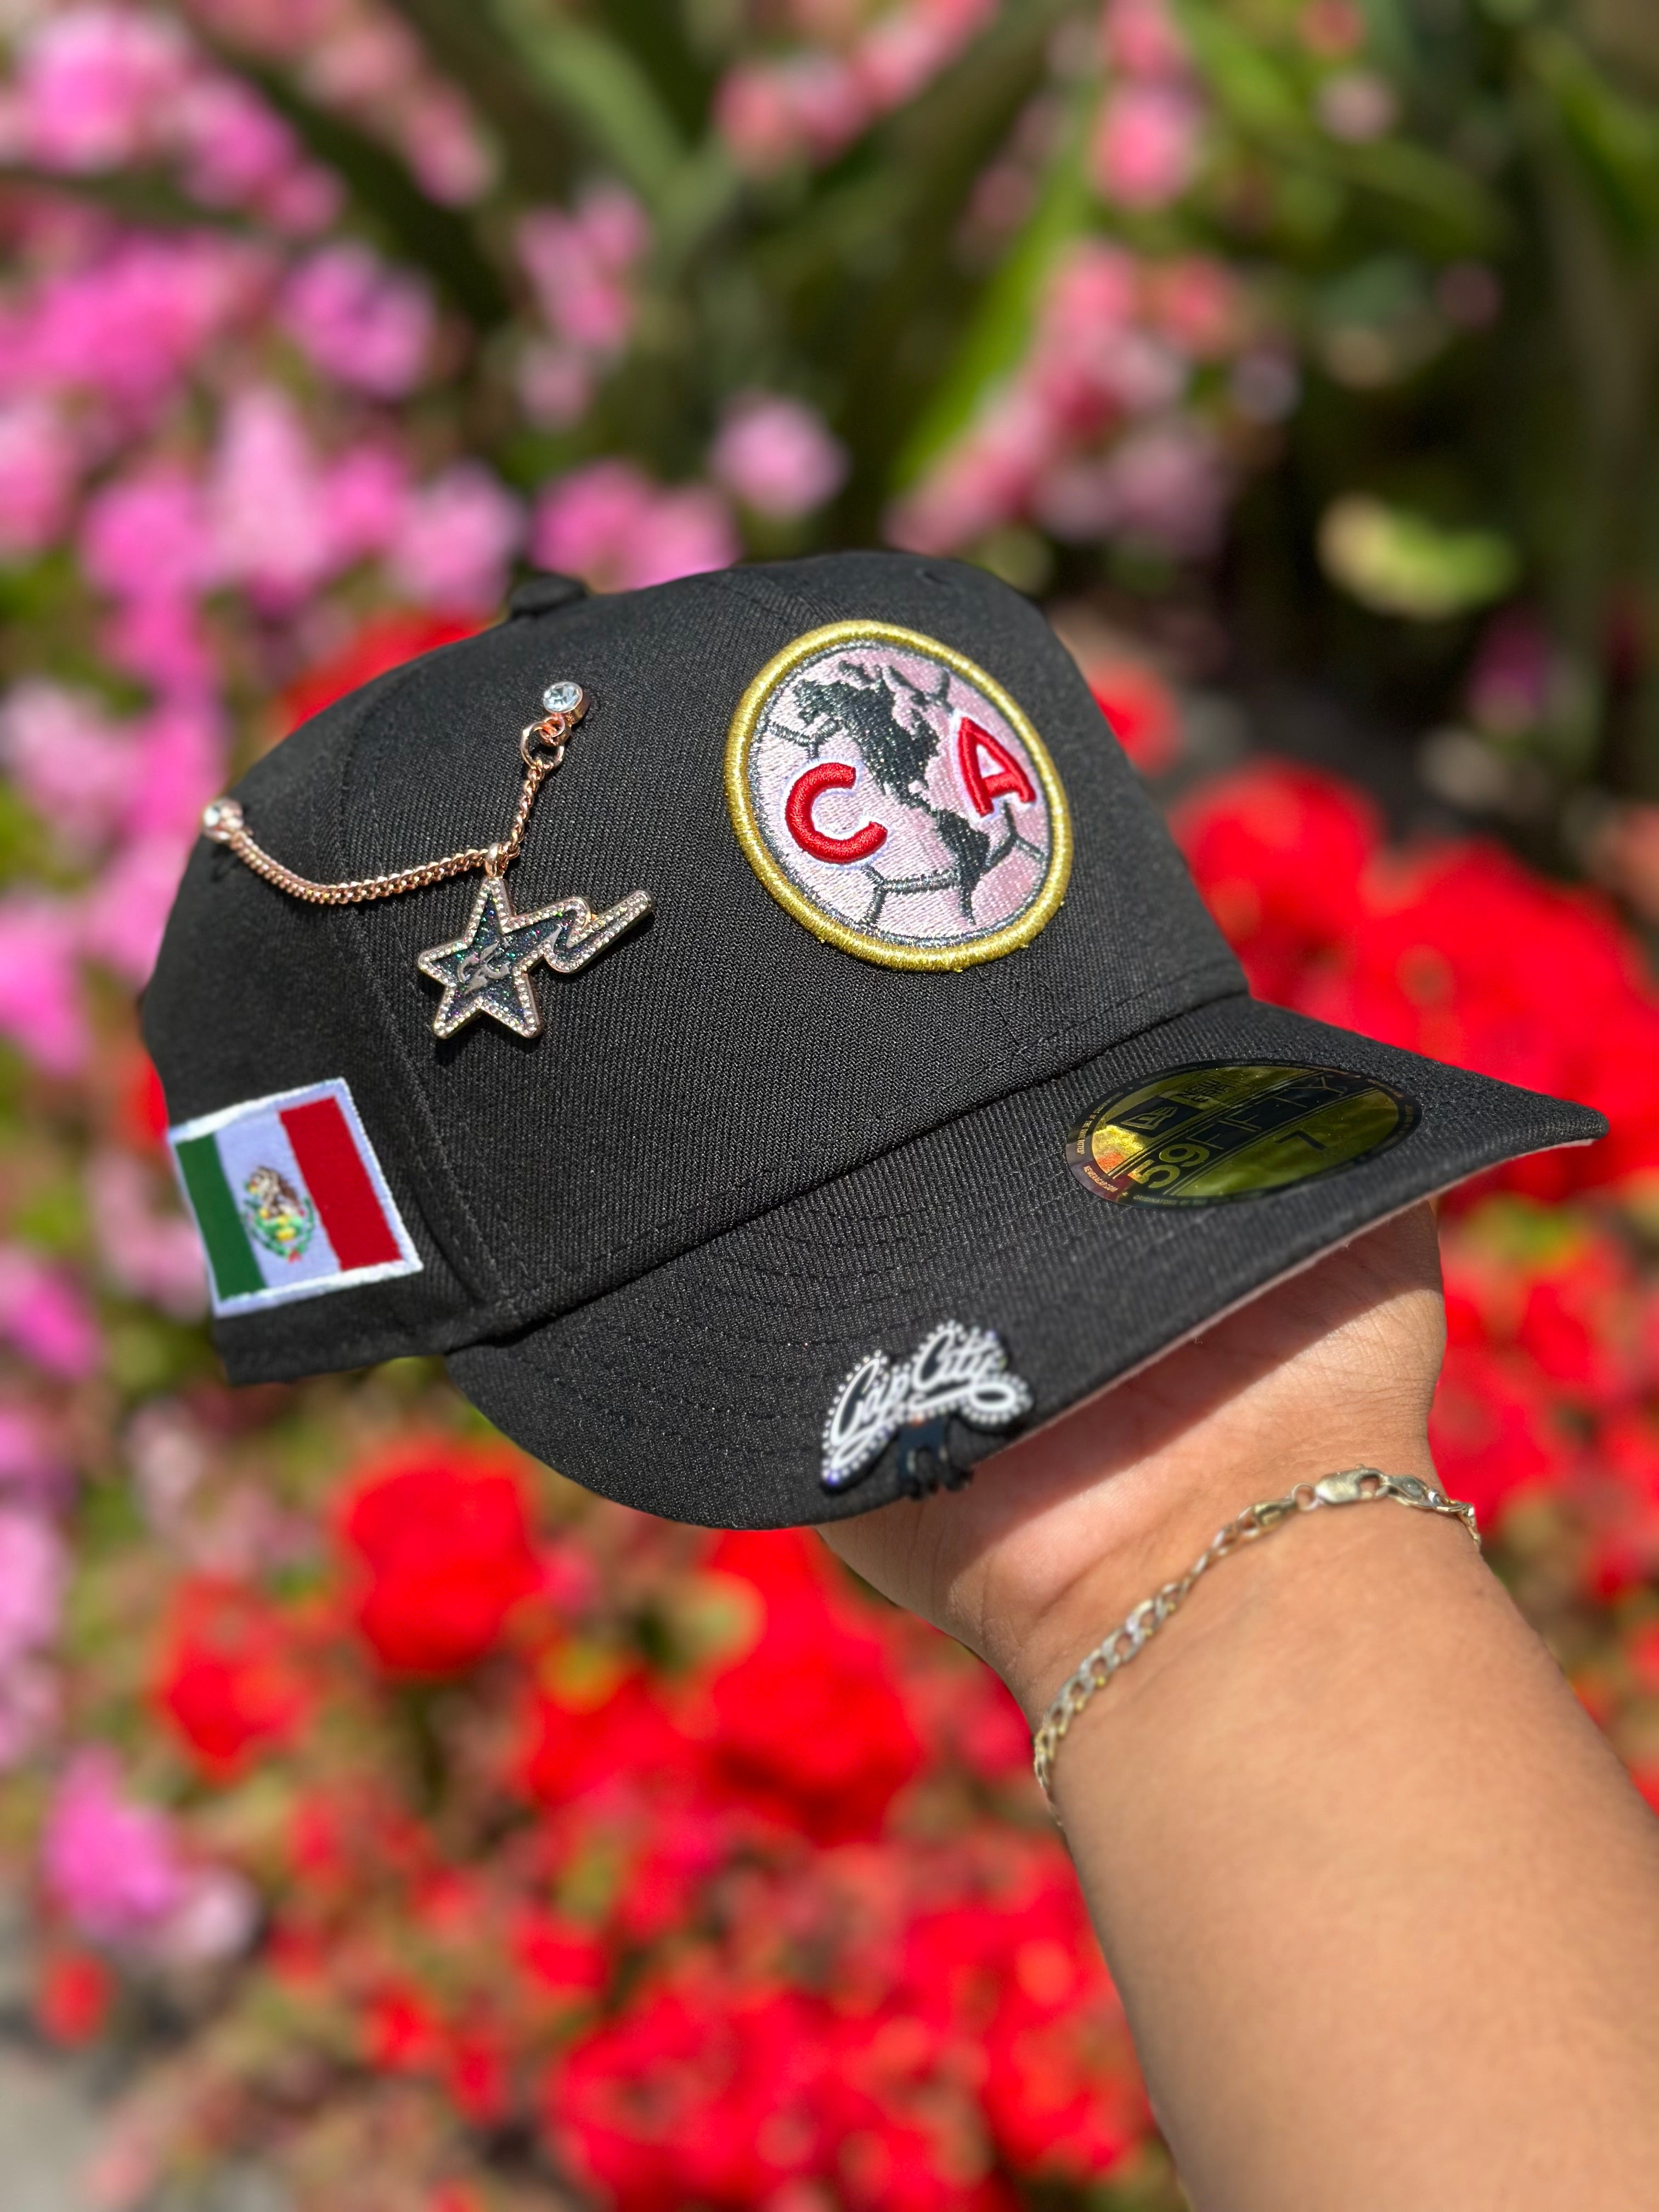 NEW ERA EXCLUSIVE 59FIFTY BLACK "CLUB AMERICA" W/ MEXICO FLAG SIDE PATCH